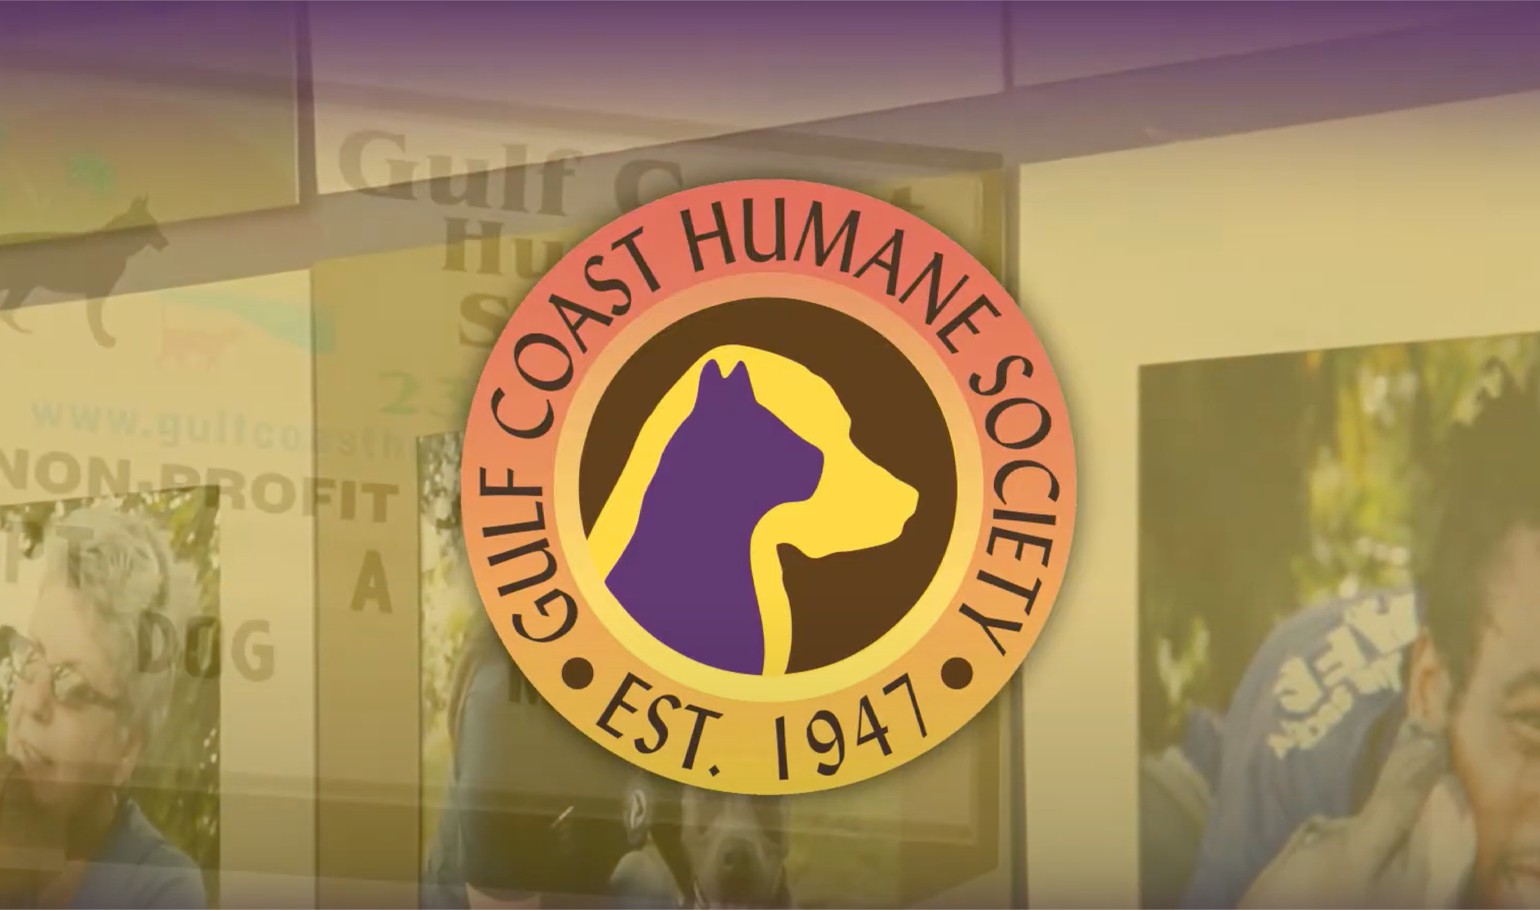 Gulf coast humane society vet how employees does conduent has